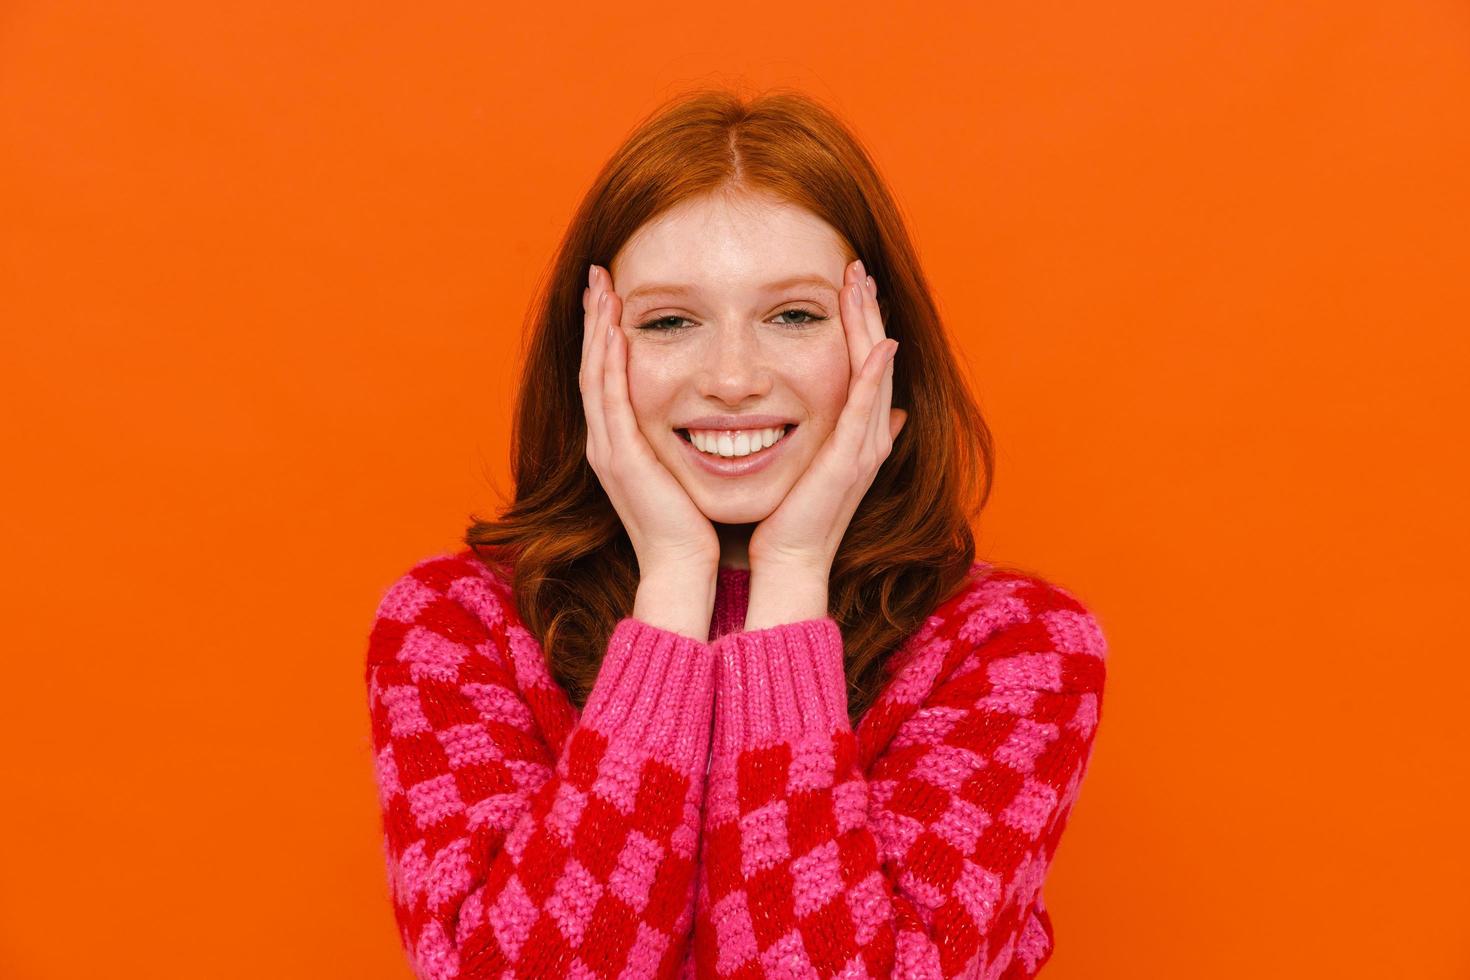 Young ginger woman in plaid sweater smiling at camera photo